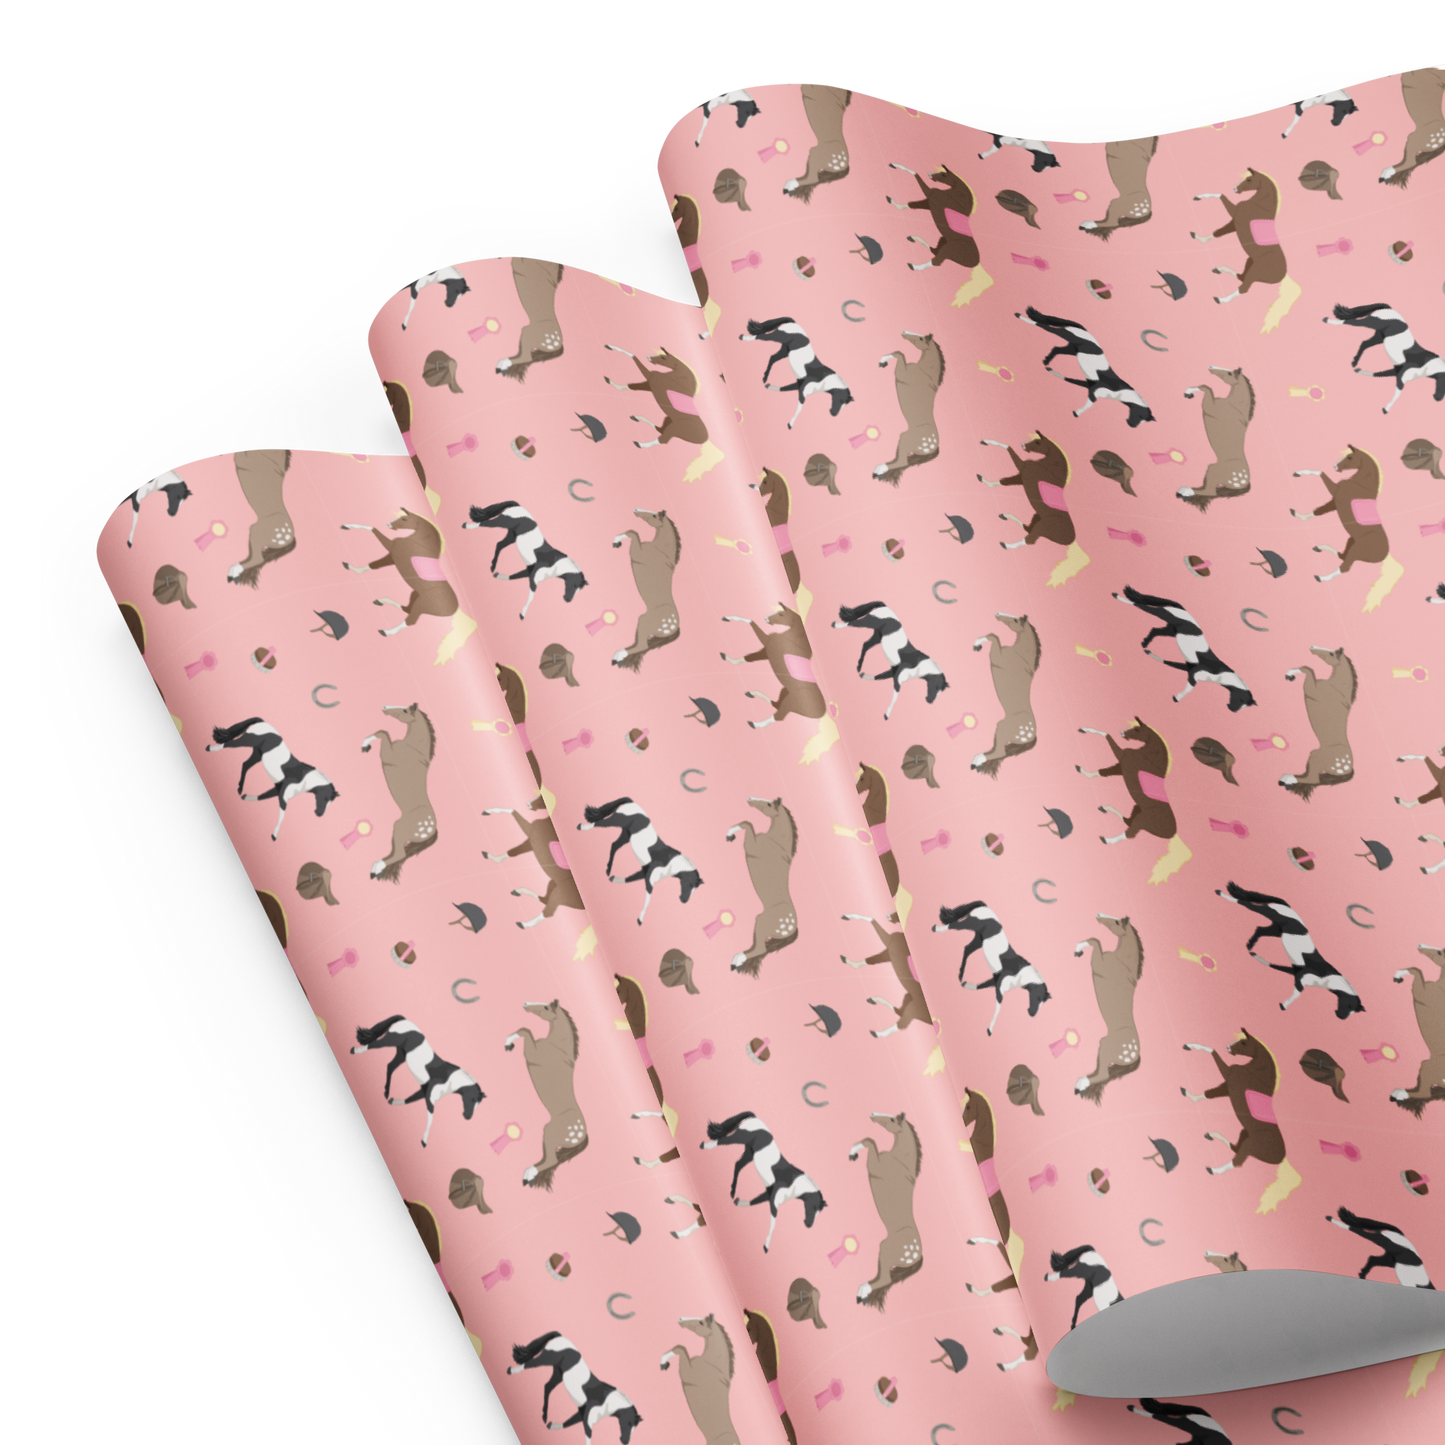 Horses & Ponies on Pink Wrapping Paper Sheets